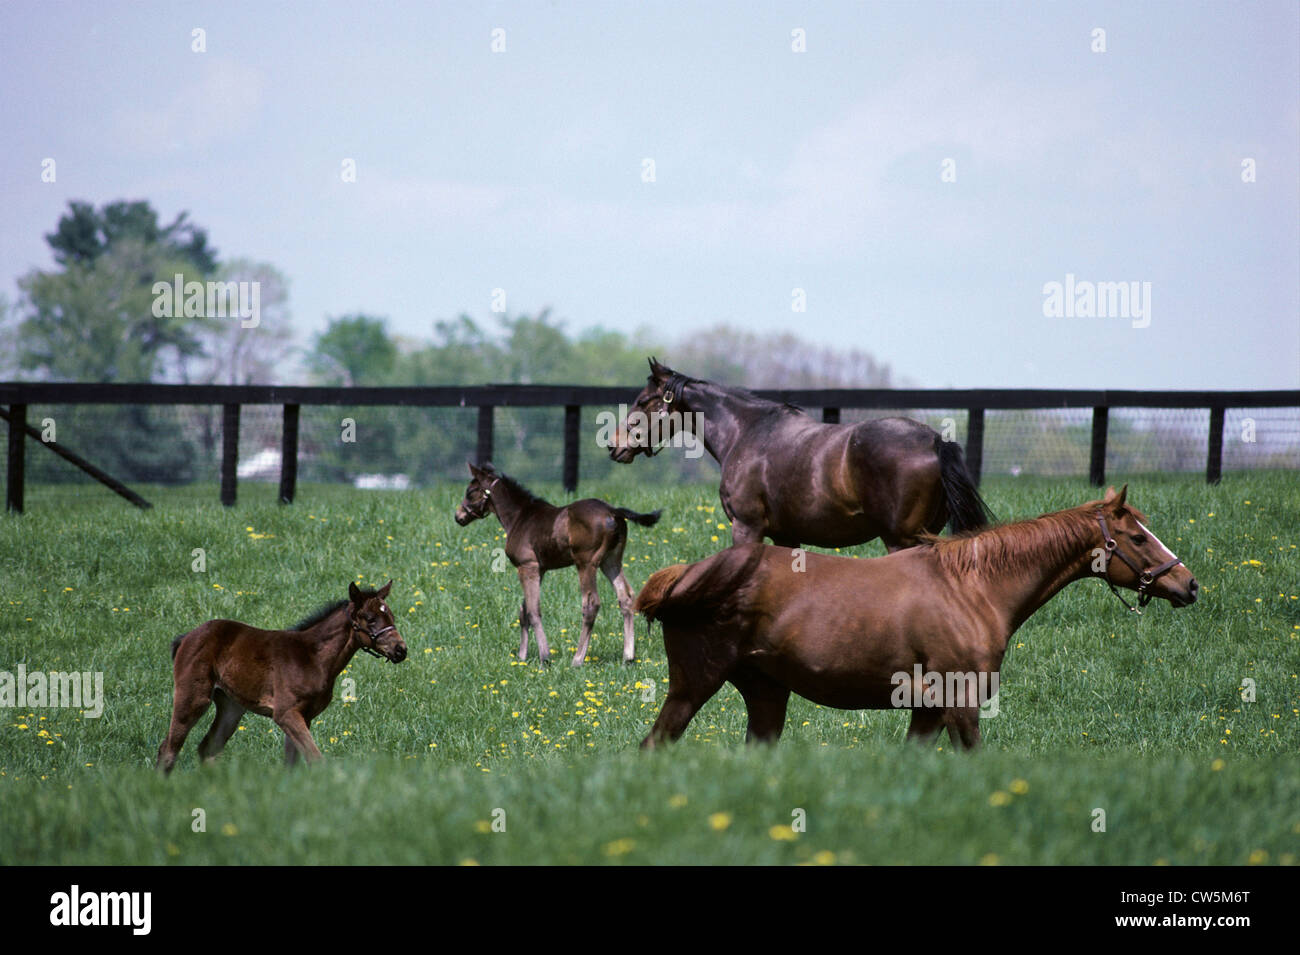 Horses and foals in a field, Cotswald Farm, Claverack, New York, USA Stock Photo